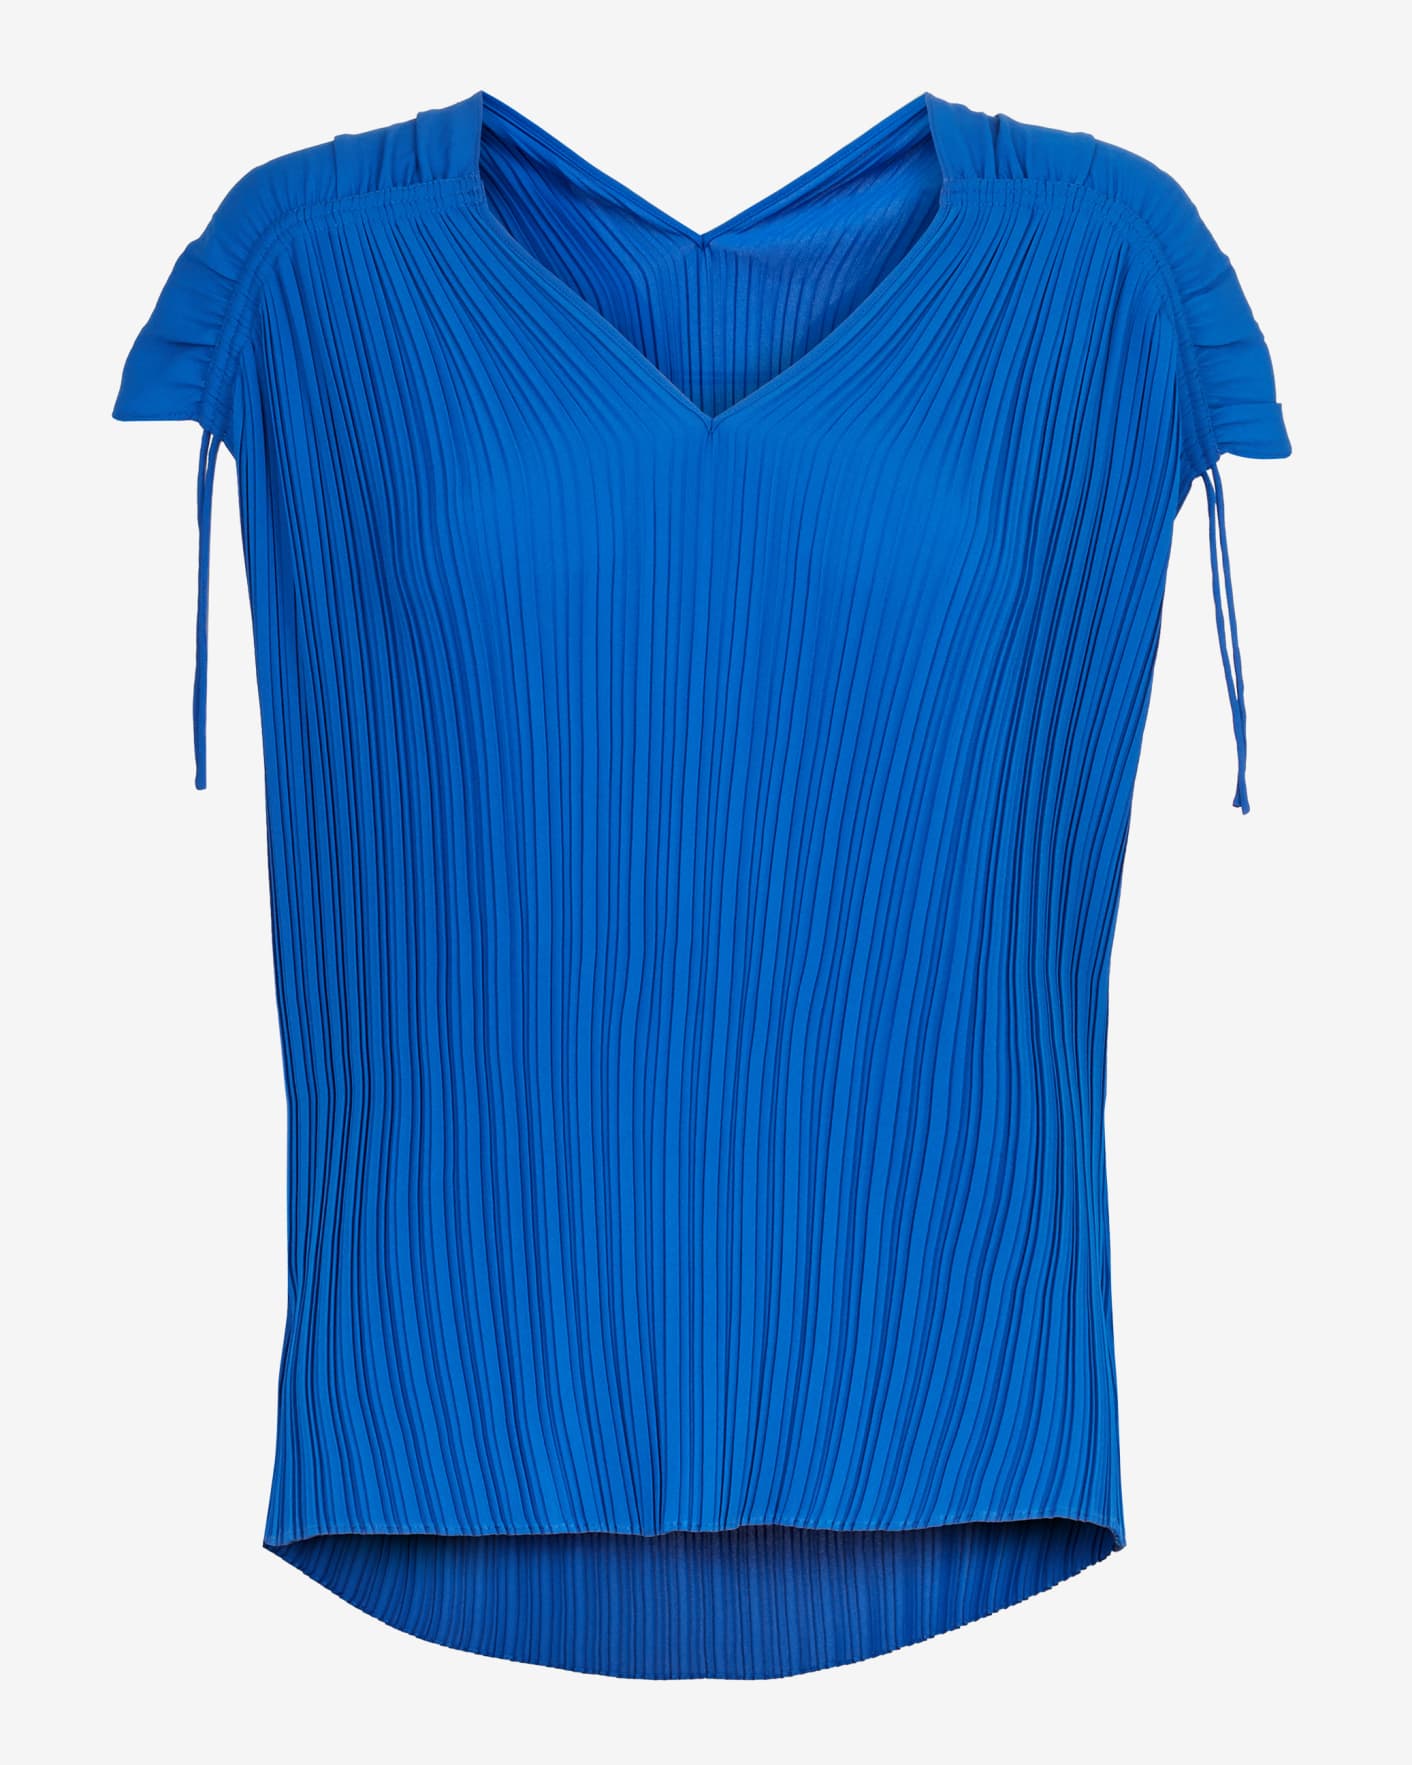 CHASTA - BLUE | Tops & T-Shirts | Ted Baker US